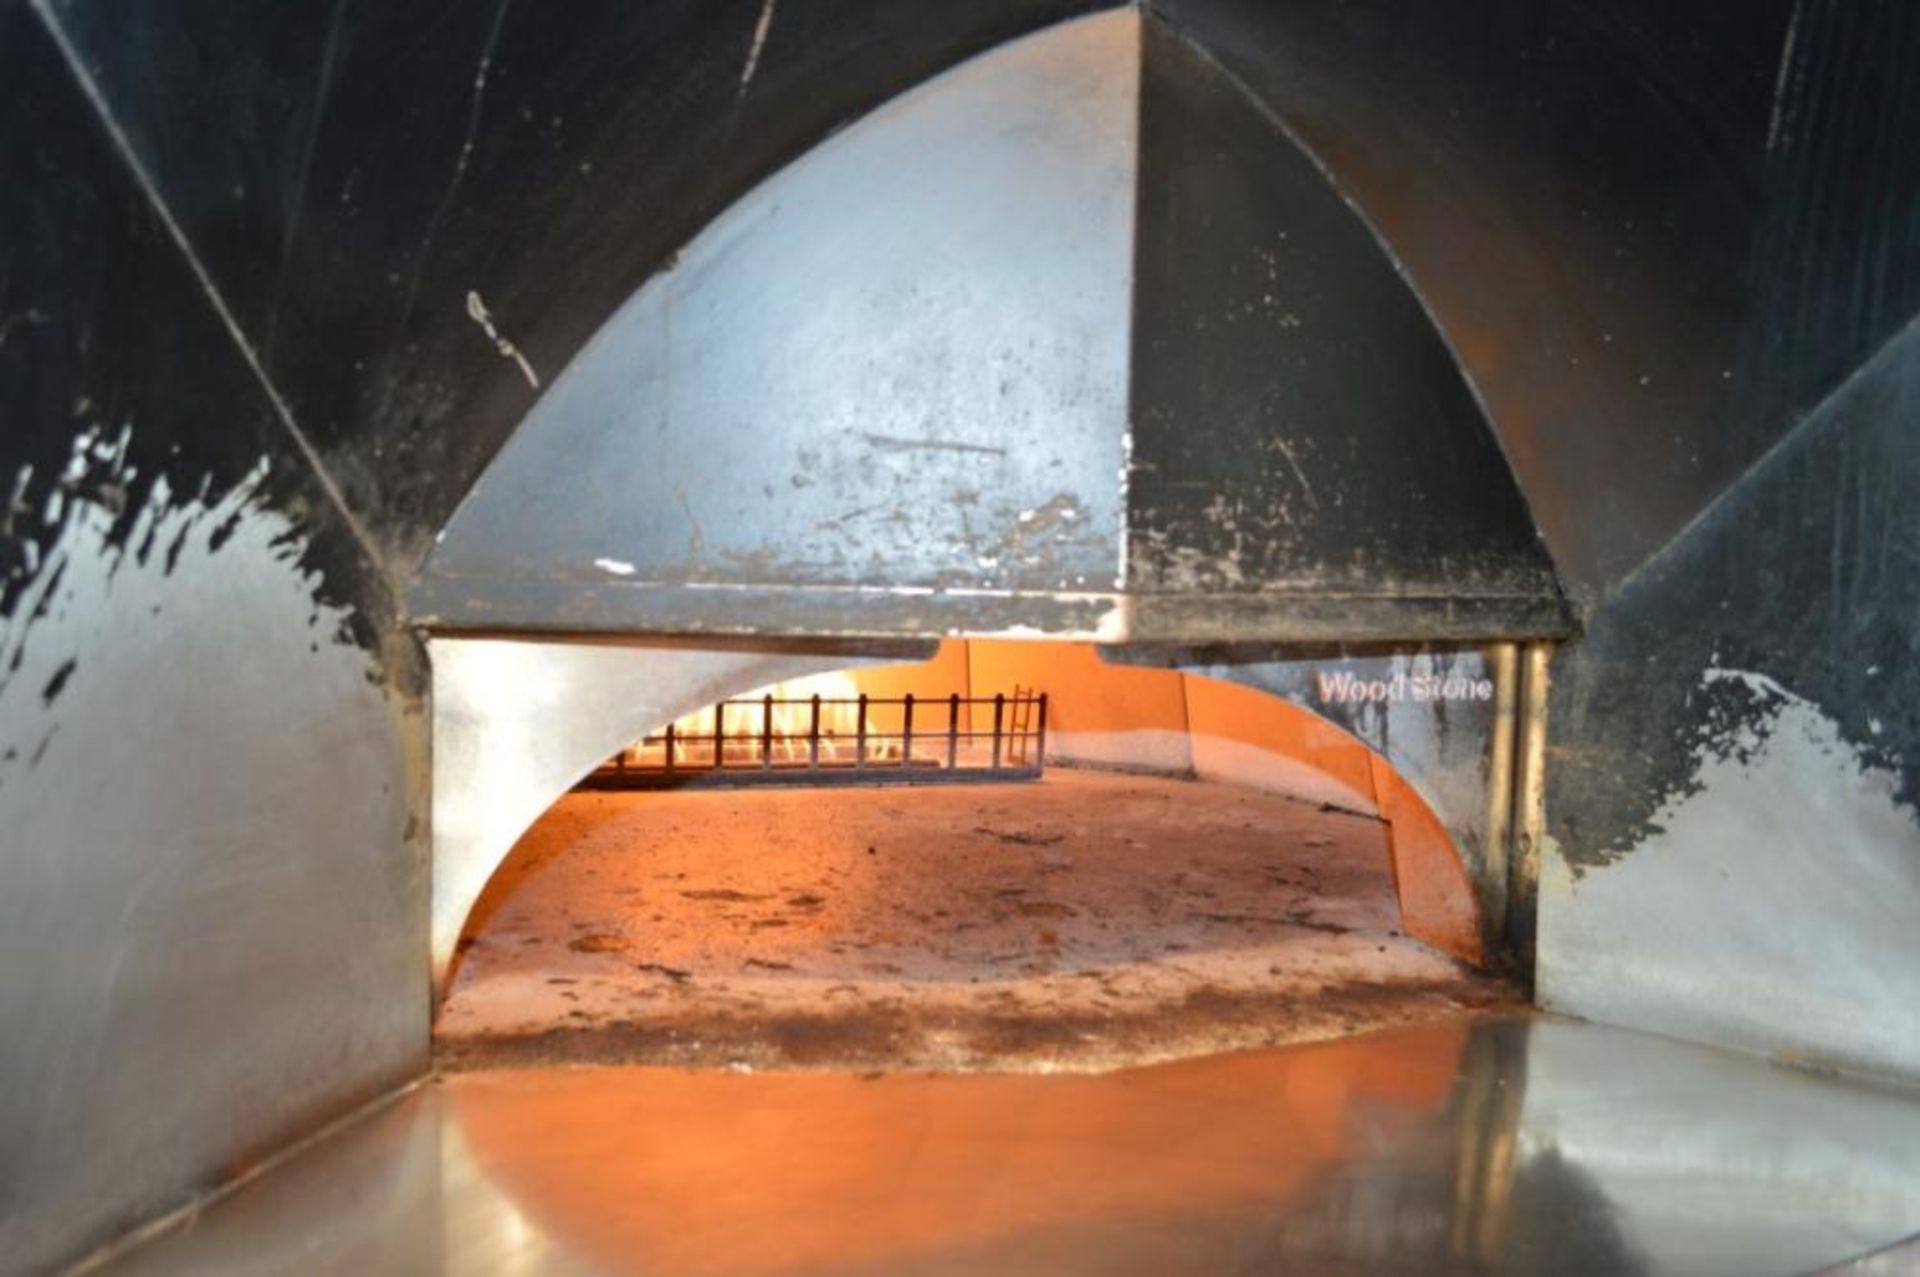 1 x Wood Stone Commercial Gas Fired Pizza Oven - CL011 - Location: Altrincham WA14 - Image 12 of 16